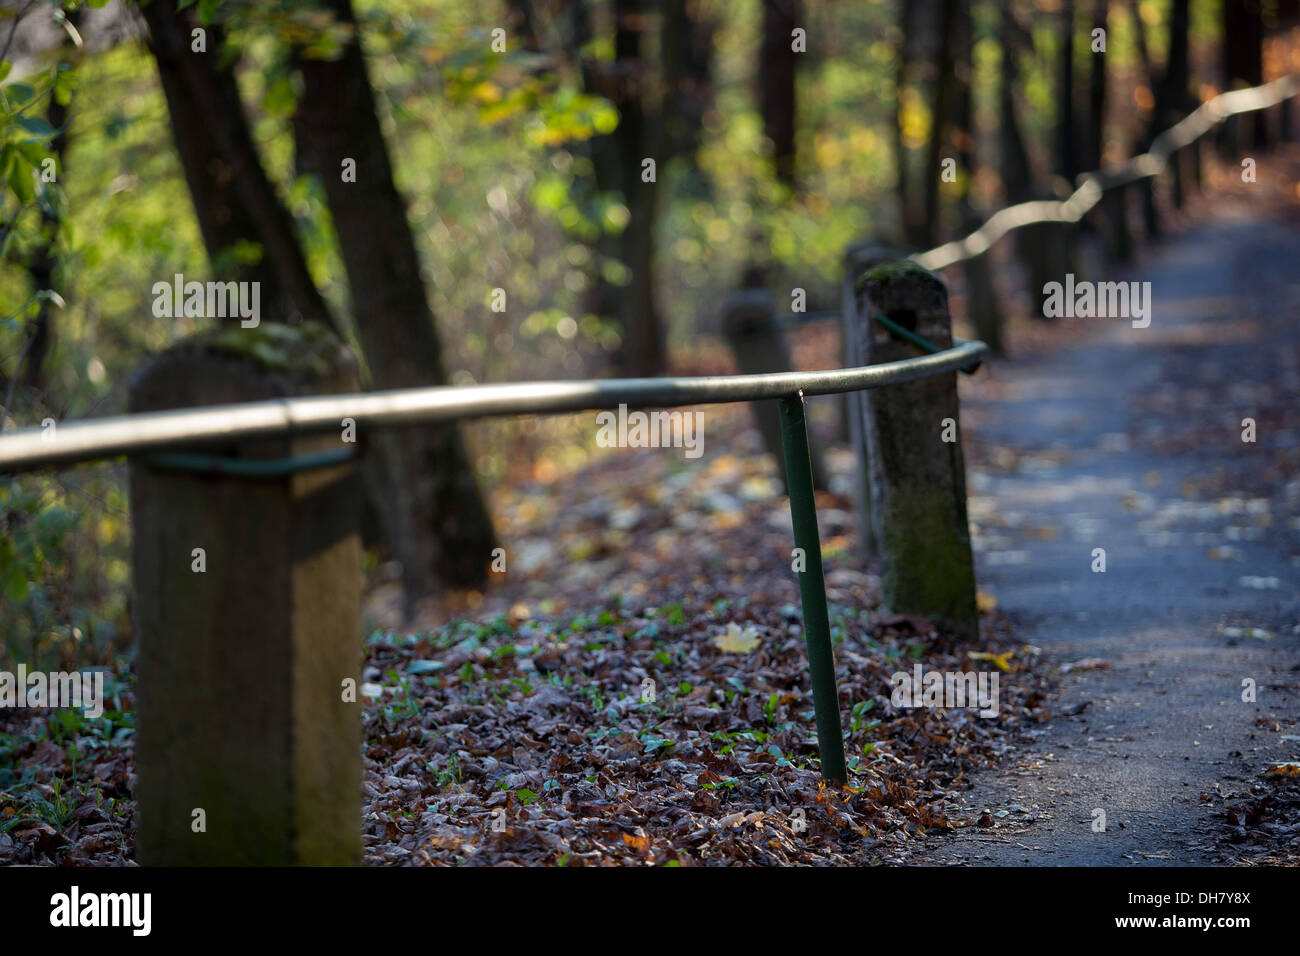 The path through the woods along the railing Stock Photo